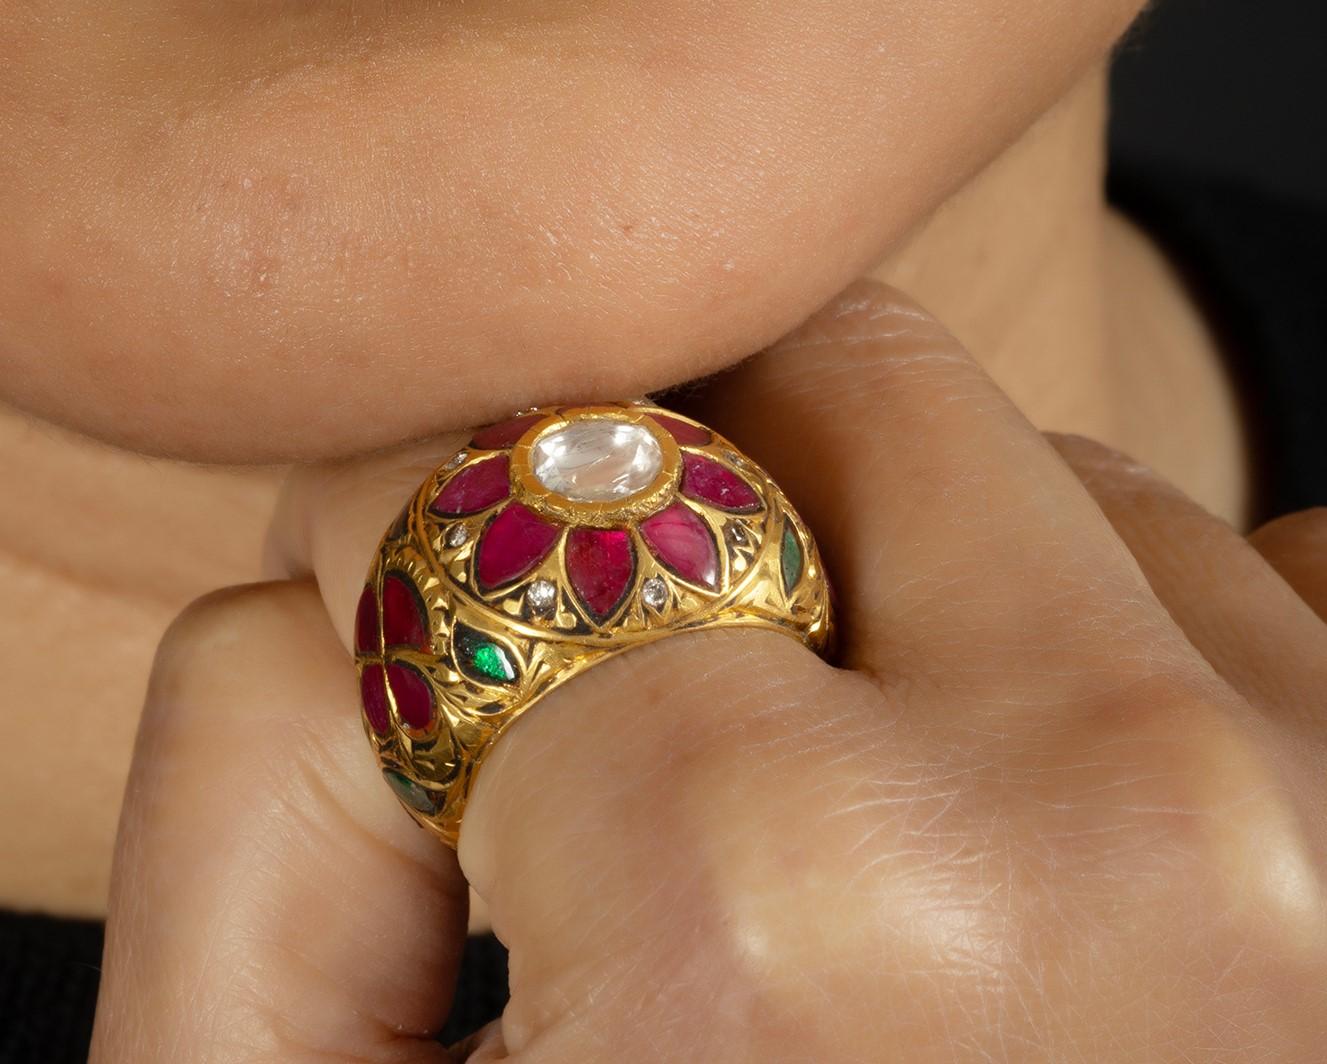 A very old technique of making jewellery blending the techniques of partash & kundan (the use of polki – uncut diamonds).

The ring is 8.620 grams of 22kt gold, 0.60 carat of high polki (uncut diamond ), 5.40 carat ruby & emerald.

The ring is 18mm